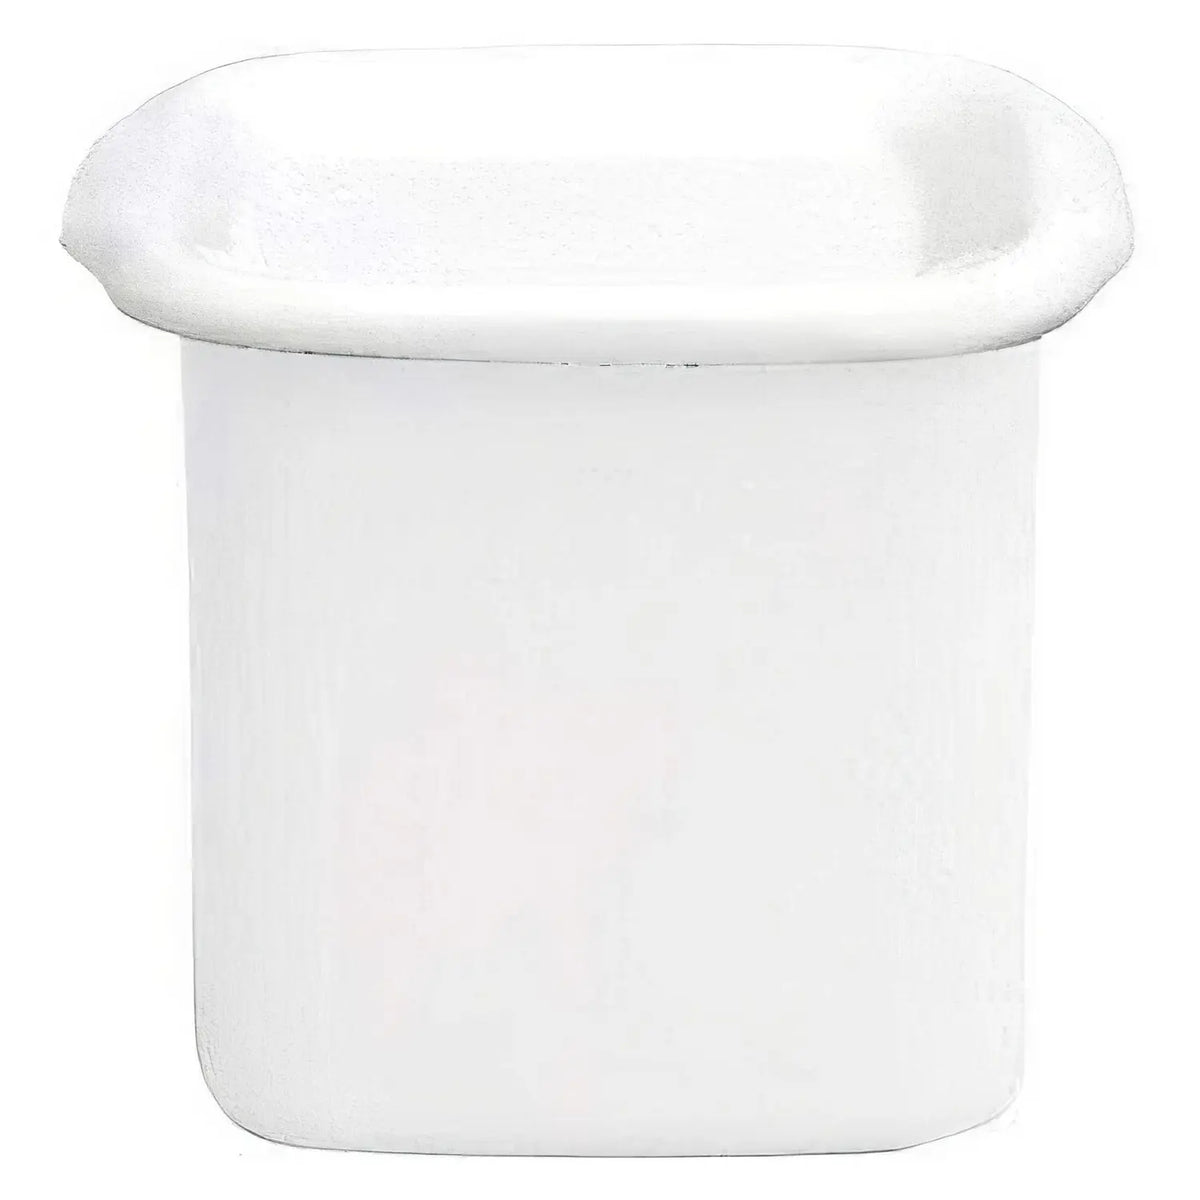 Noda Horo White Series Enamel Square Food Containers with Enamel Lid